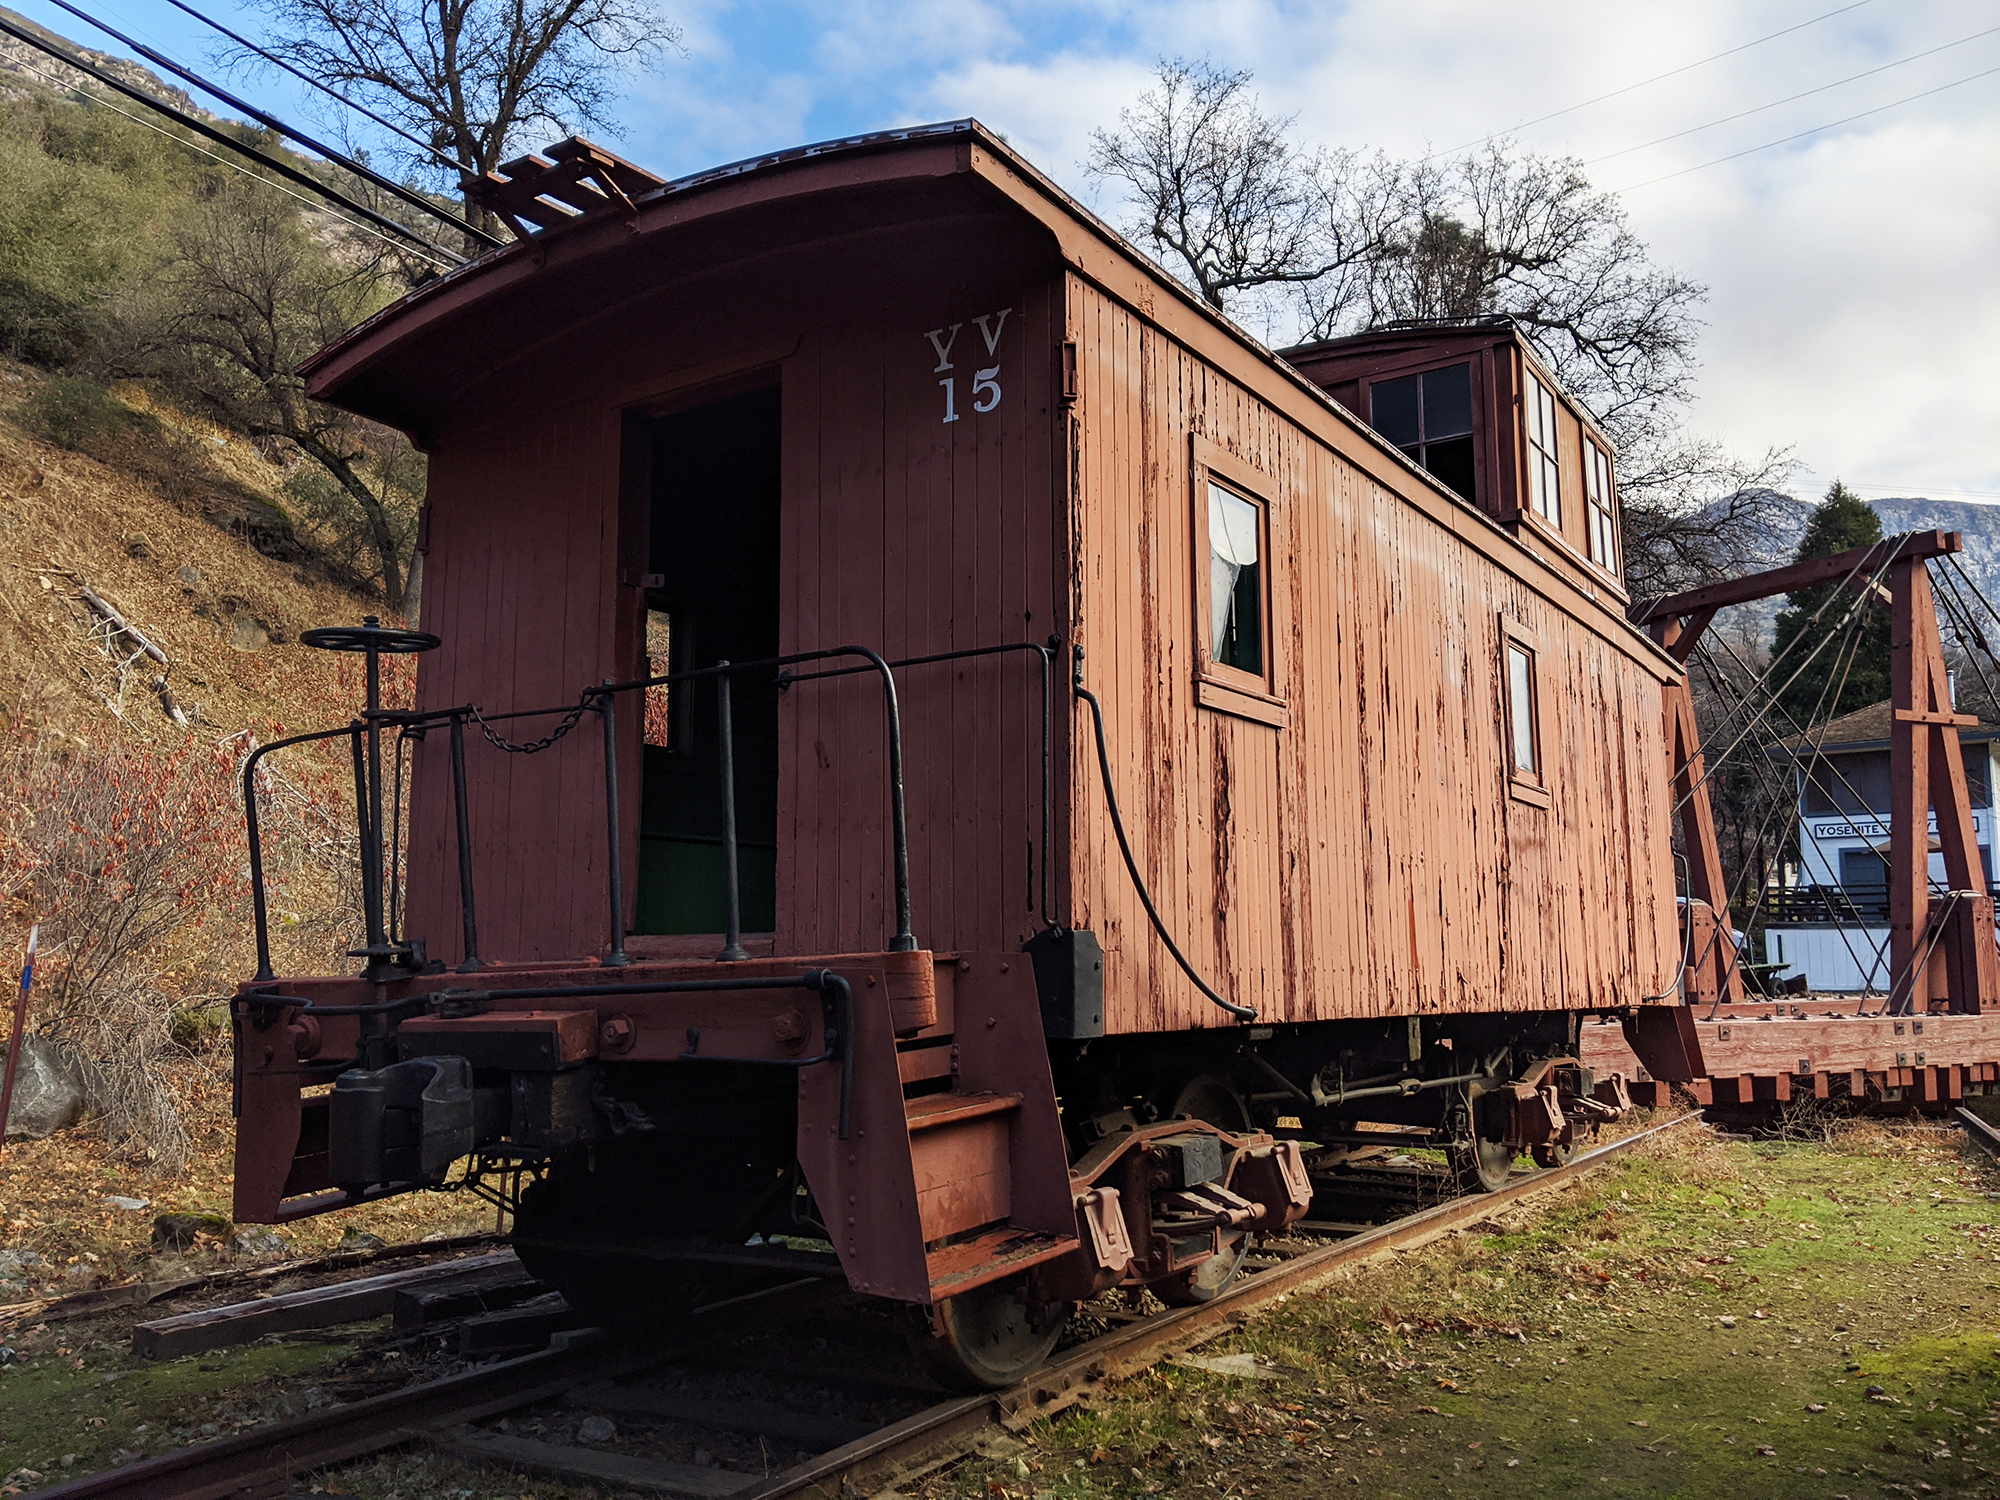 An old, red caboose sits in El Portal